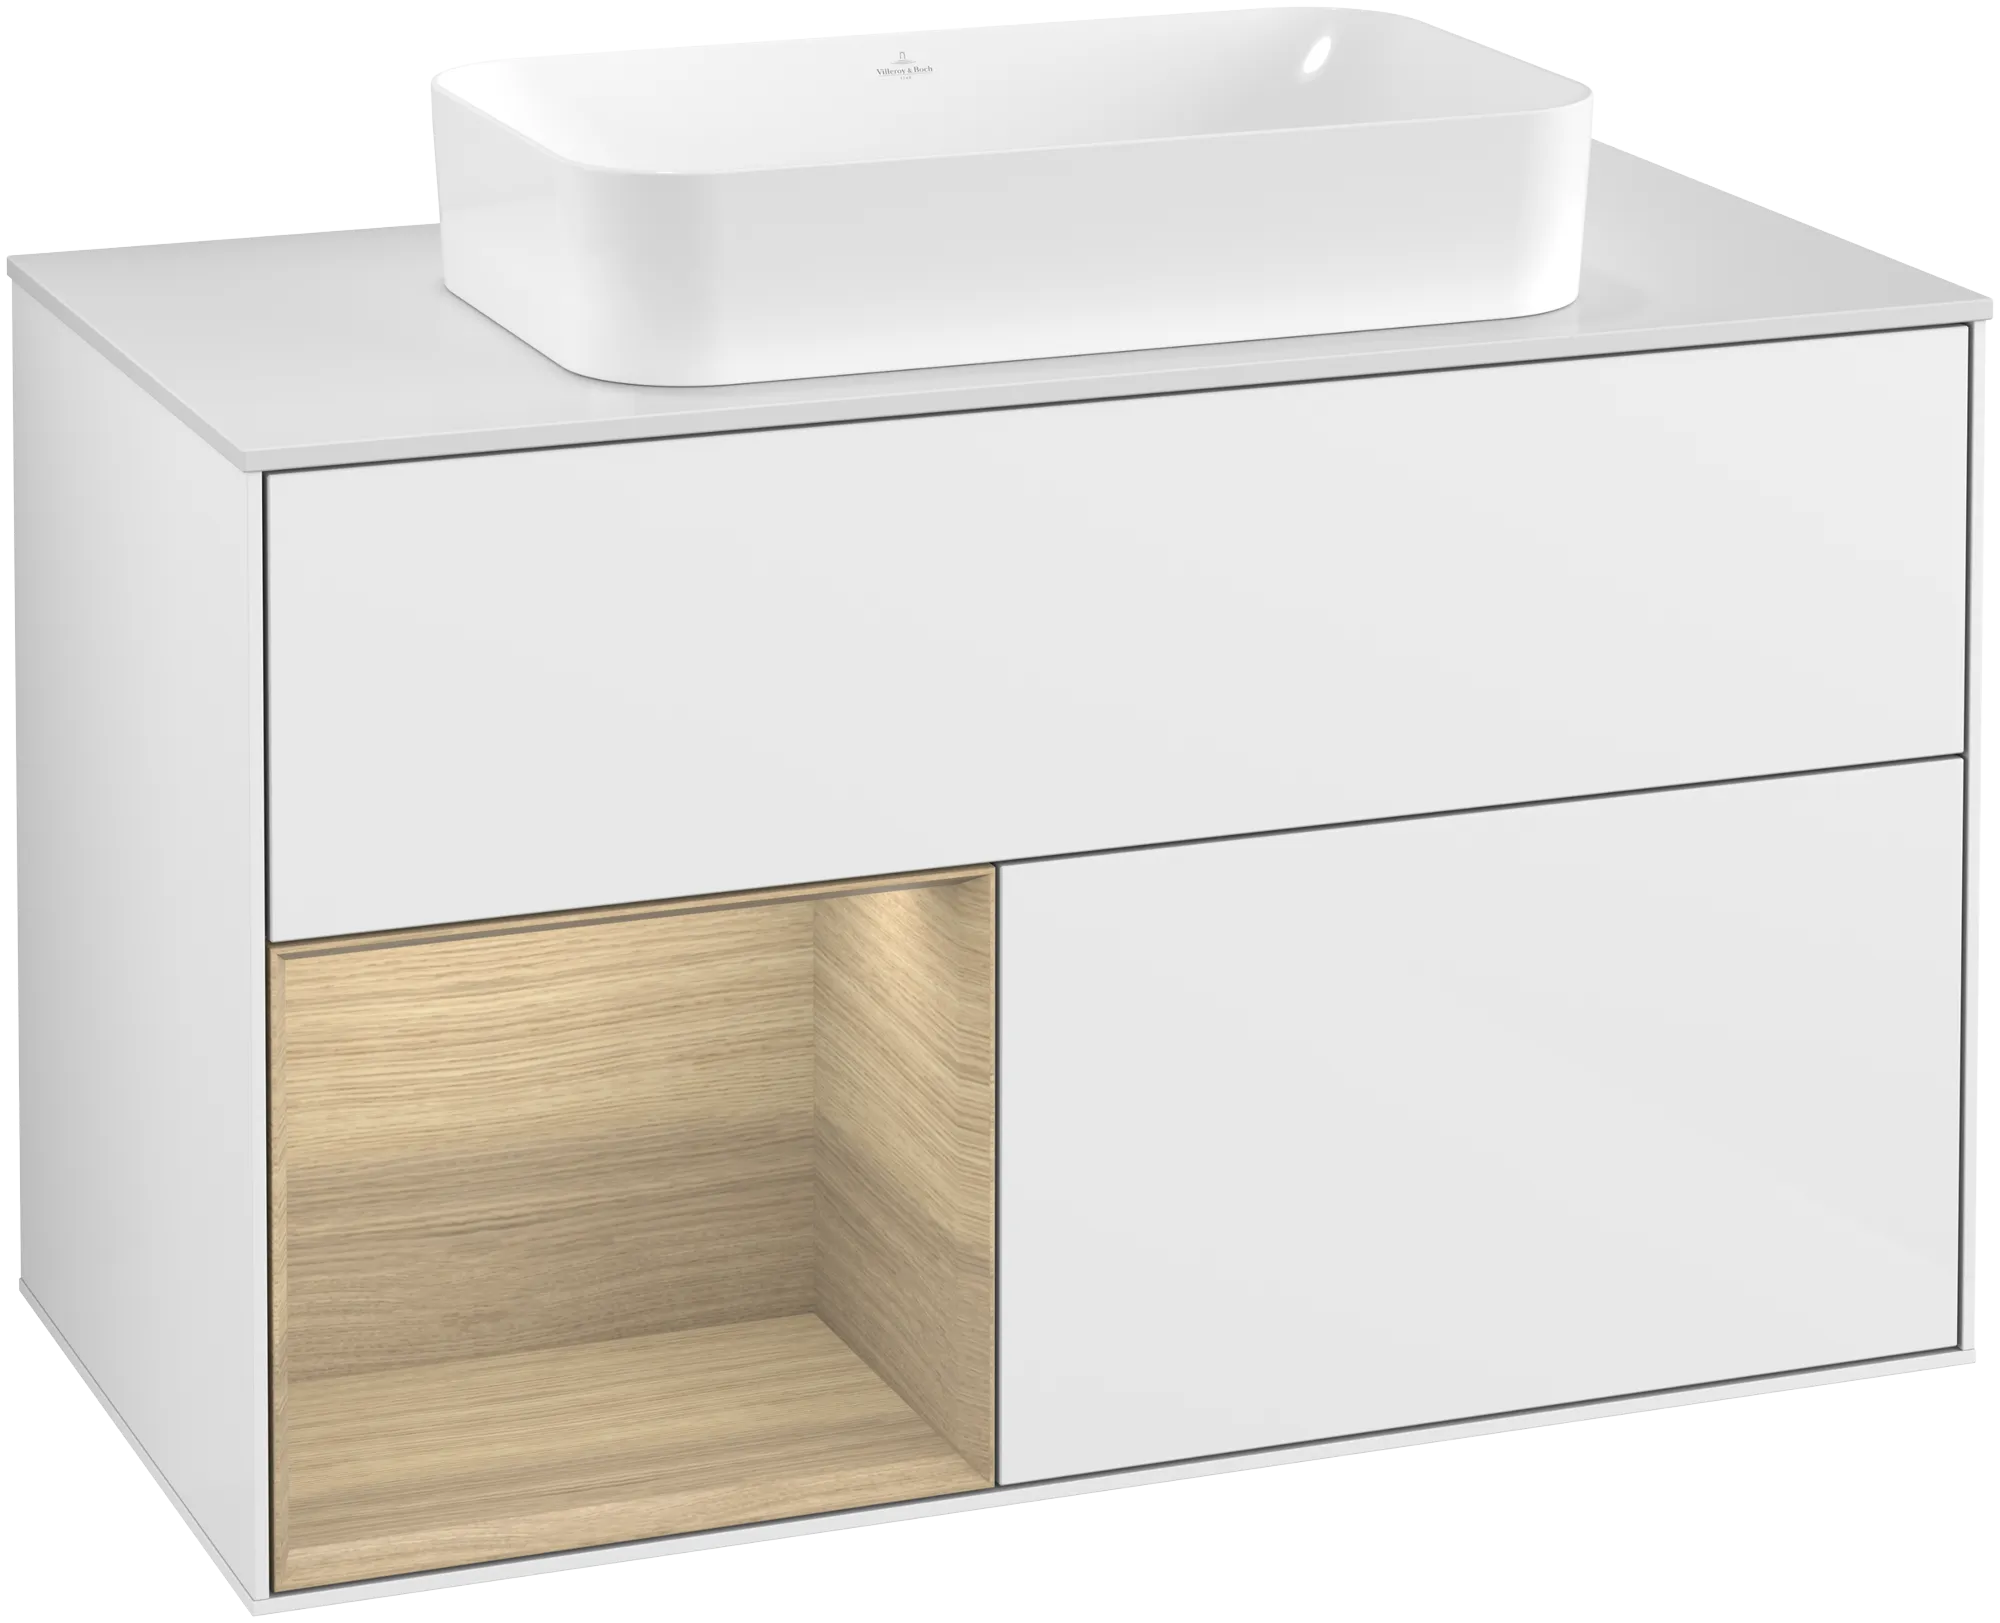 Picture of VILLEROY BOCH Finion Vanity unit, with lighting, 2 pull-out compartments, 1000 x 603 x 501 mm, Glossy White Lacquer / Oak Veneer / Glass White Matt #G241PCGF